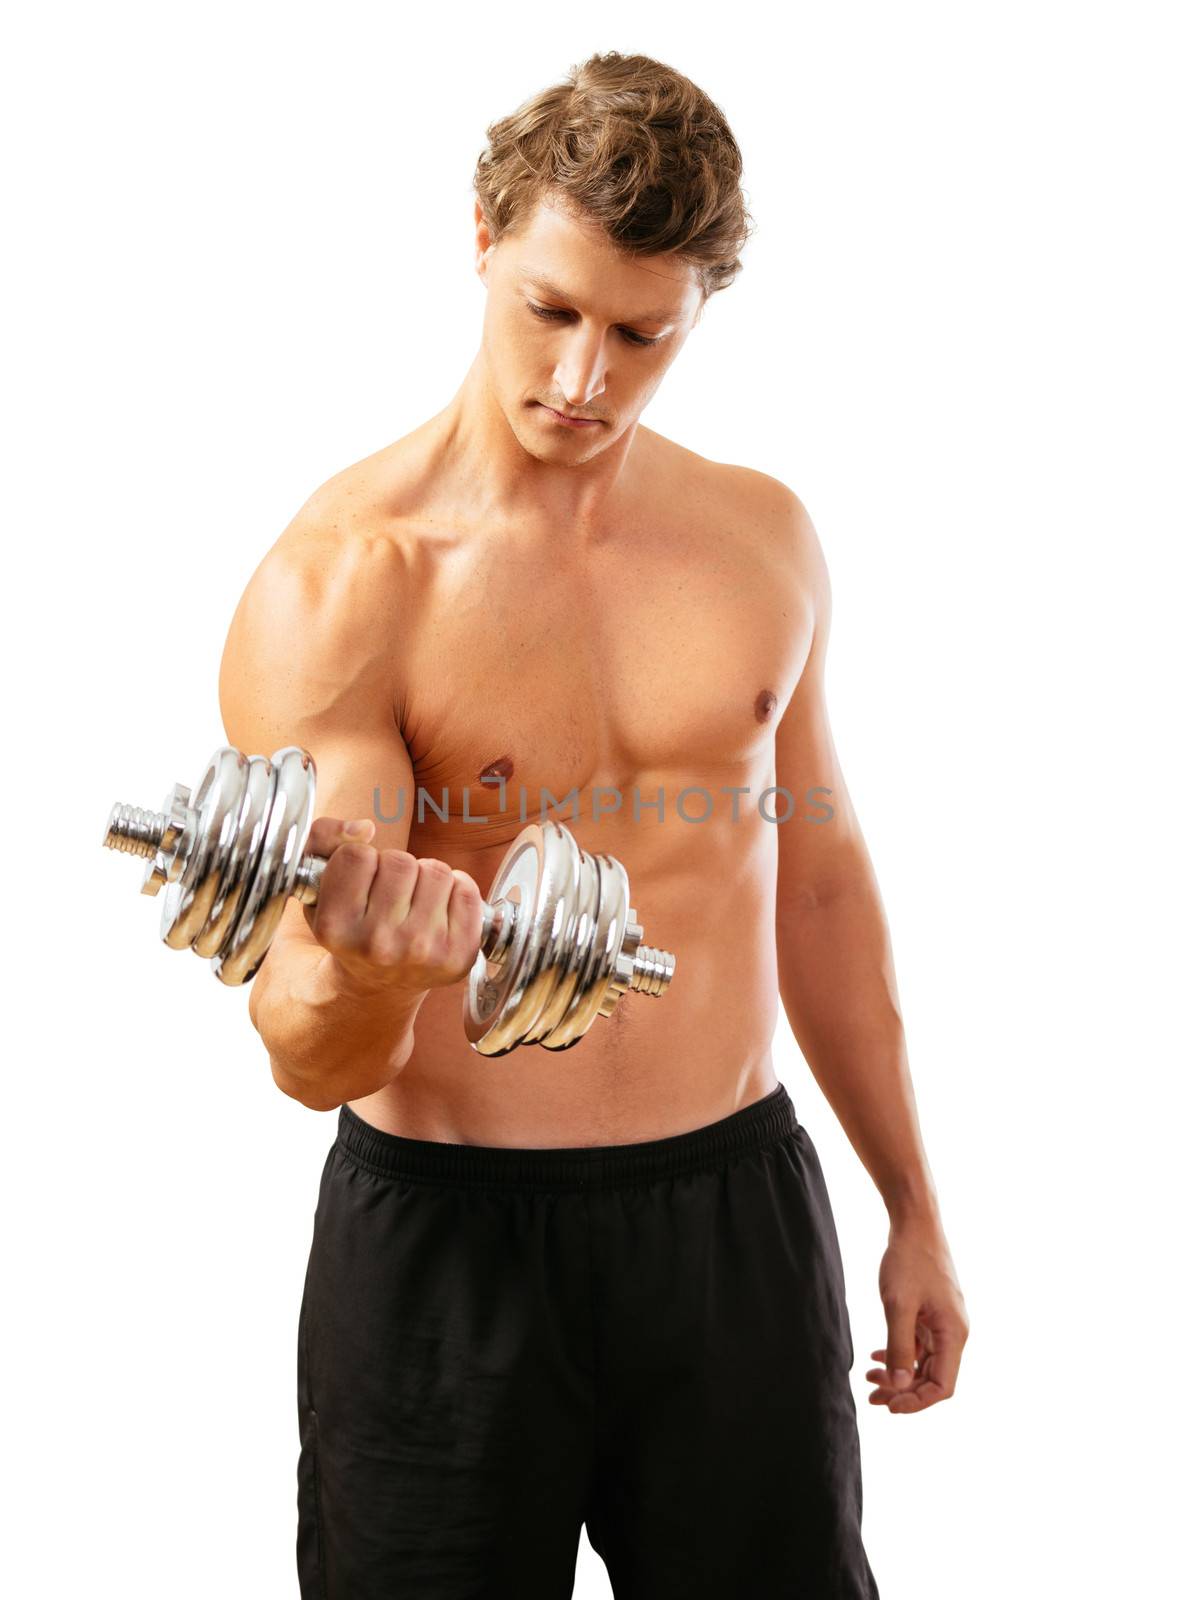 Shirtless bicep curl by sumners